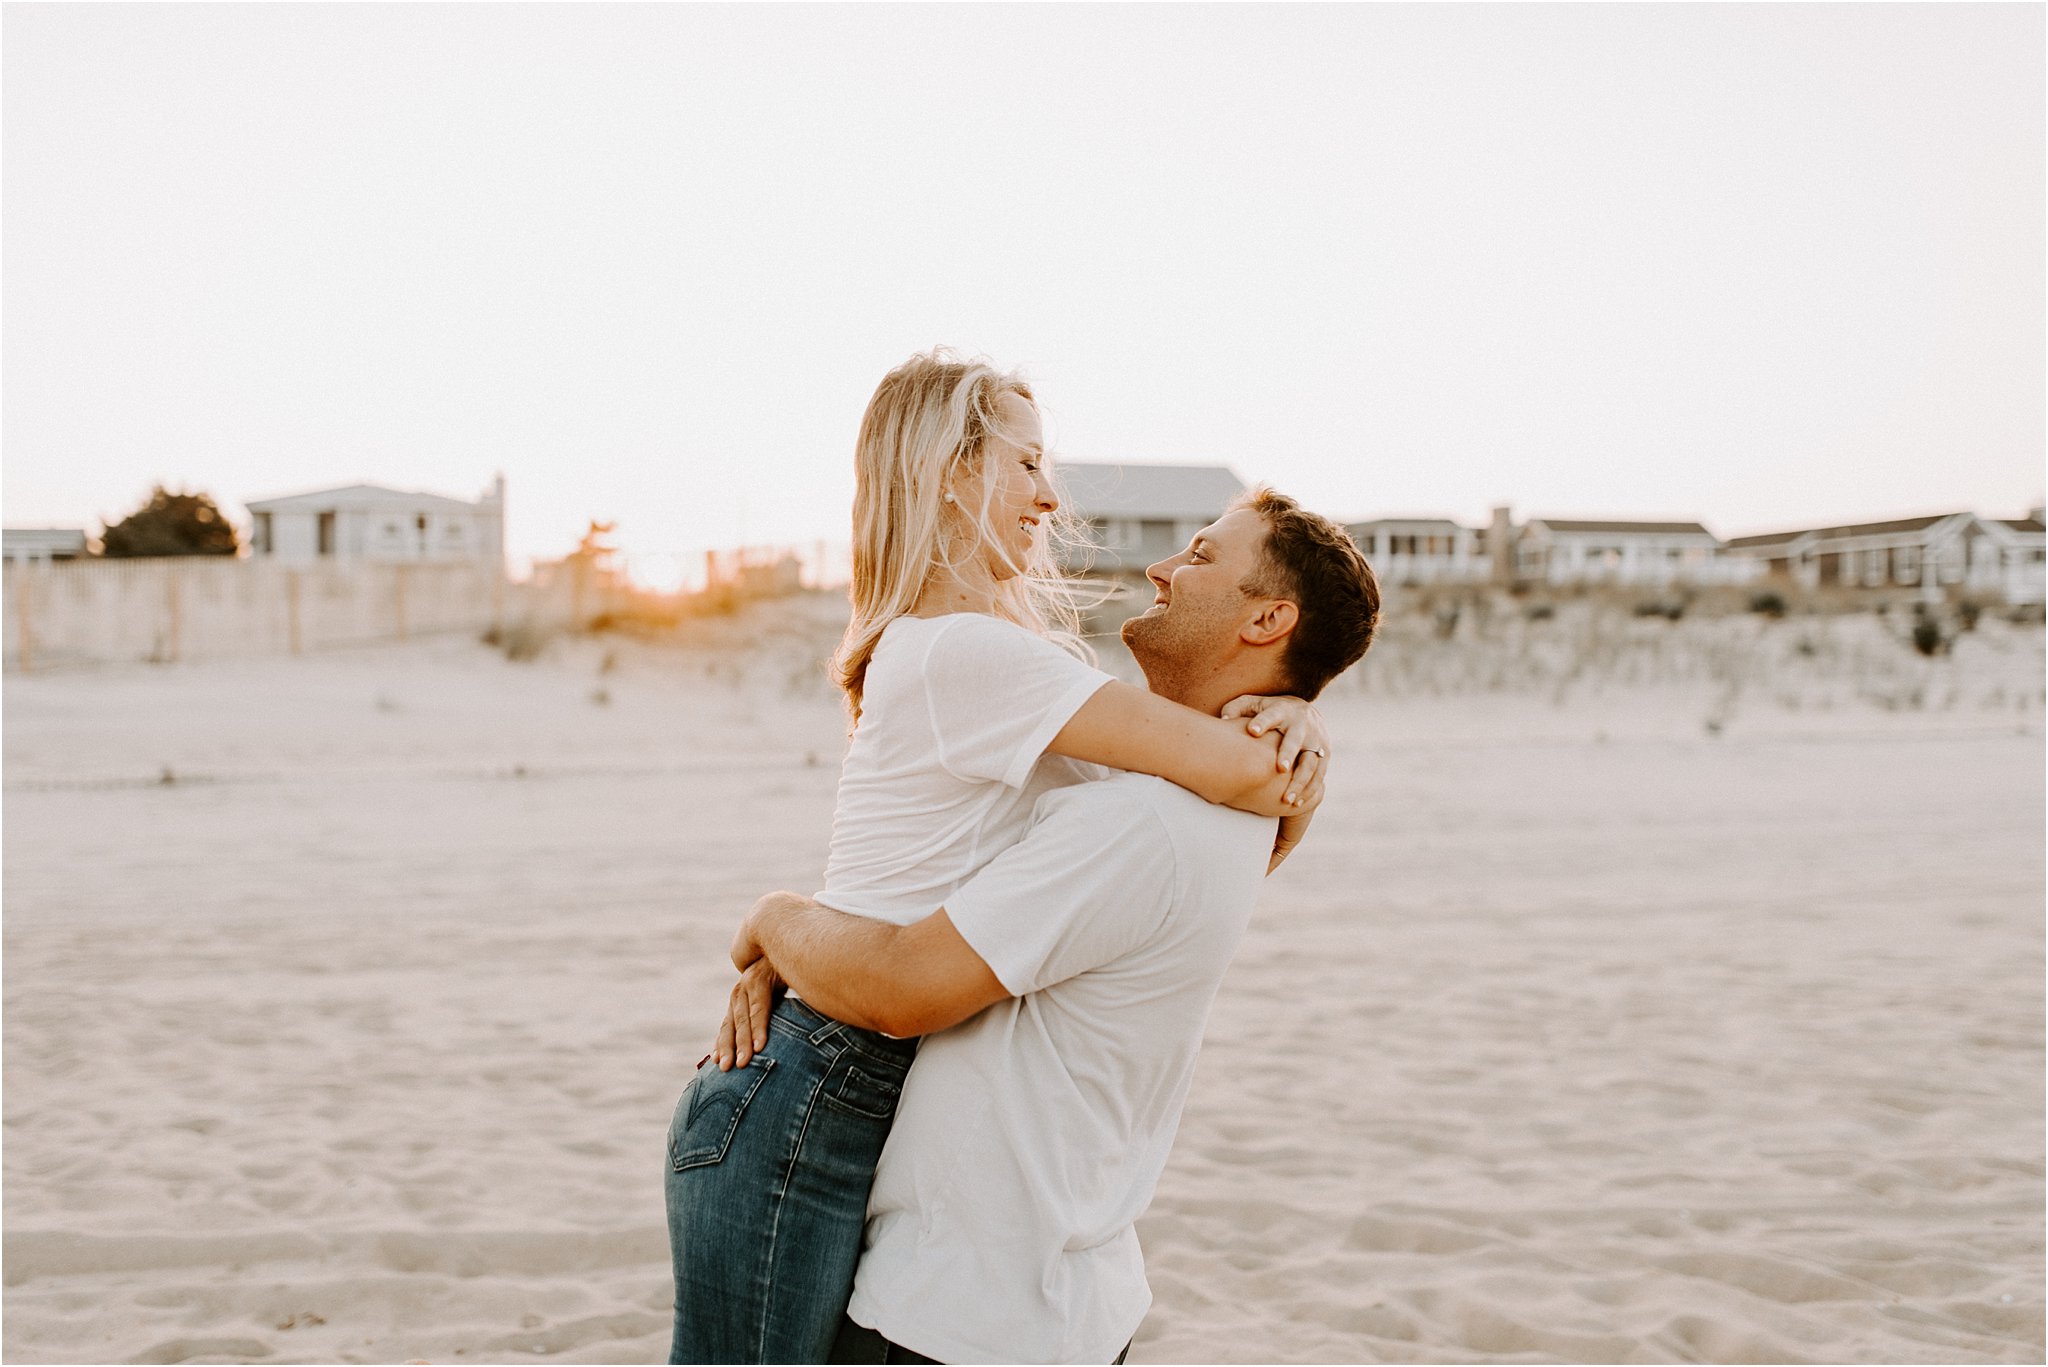 Chris + Sami – Fenwick Island Engagement Session — Sincerely, The Kitchens